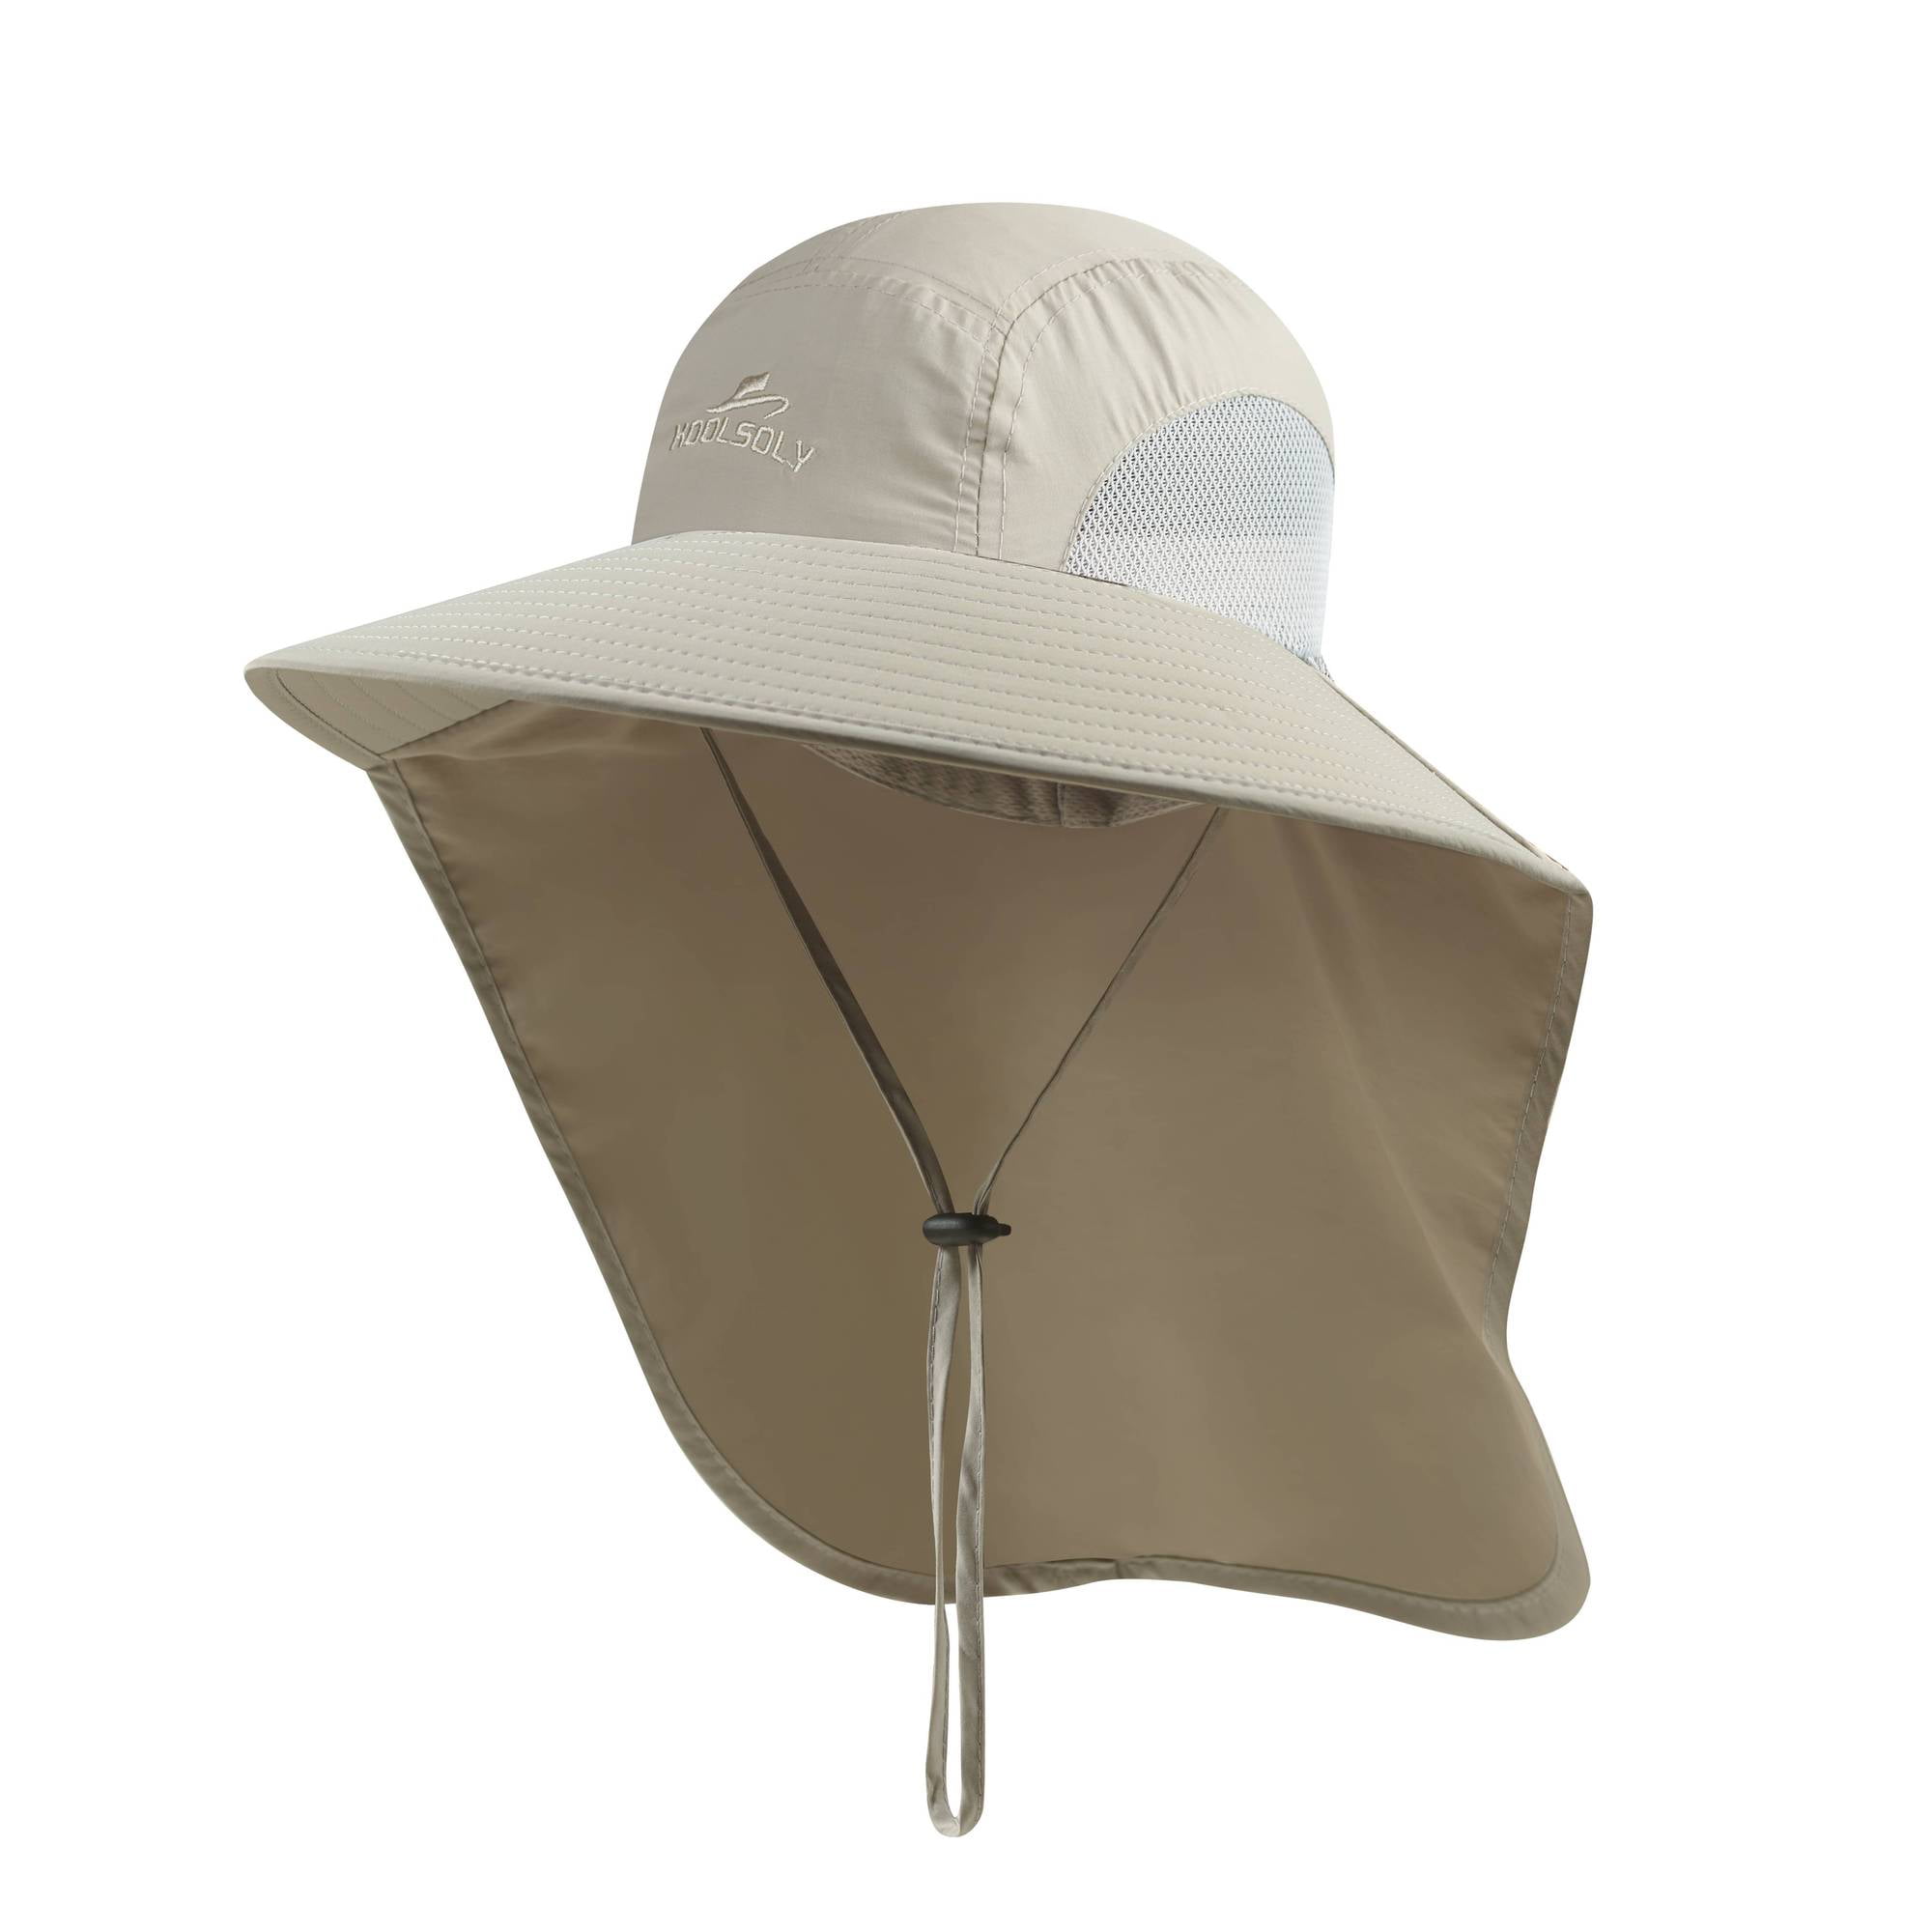 UNIPRIMEBBQ Fishing hat Wide Brim Sun Protection Hat with Breathable Safari hat Fisherman hat Hiking Boonie Hats for Man